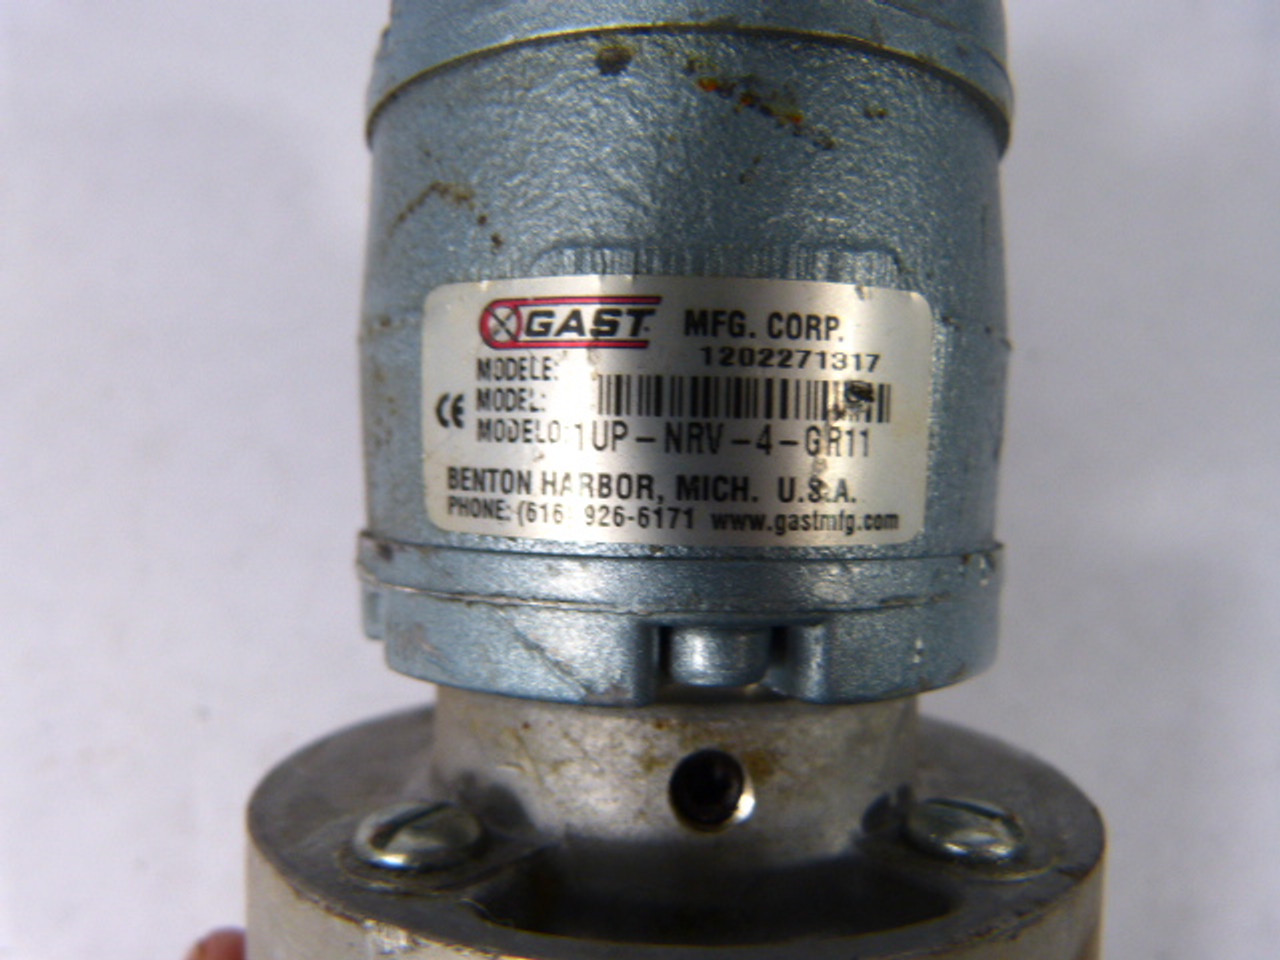 Gast 1UP-NRV-4-GR11 0.31HP 0.23kW 400RPM 80PSI USED